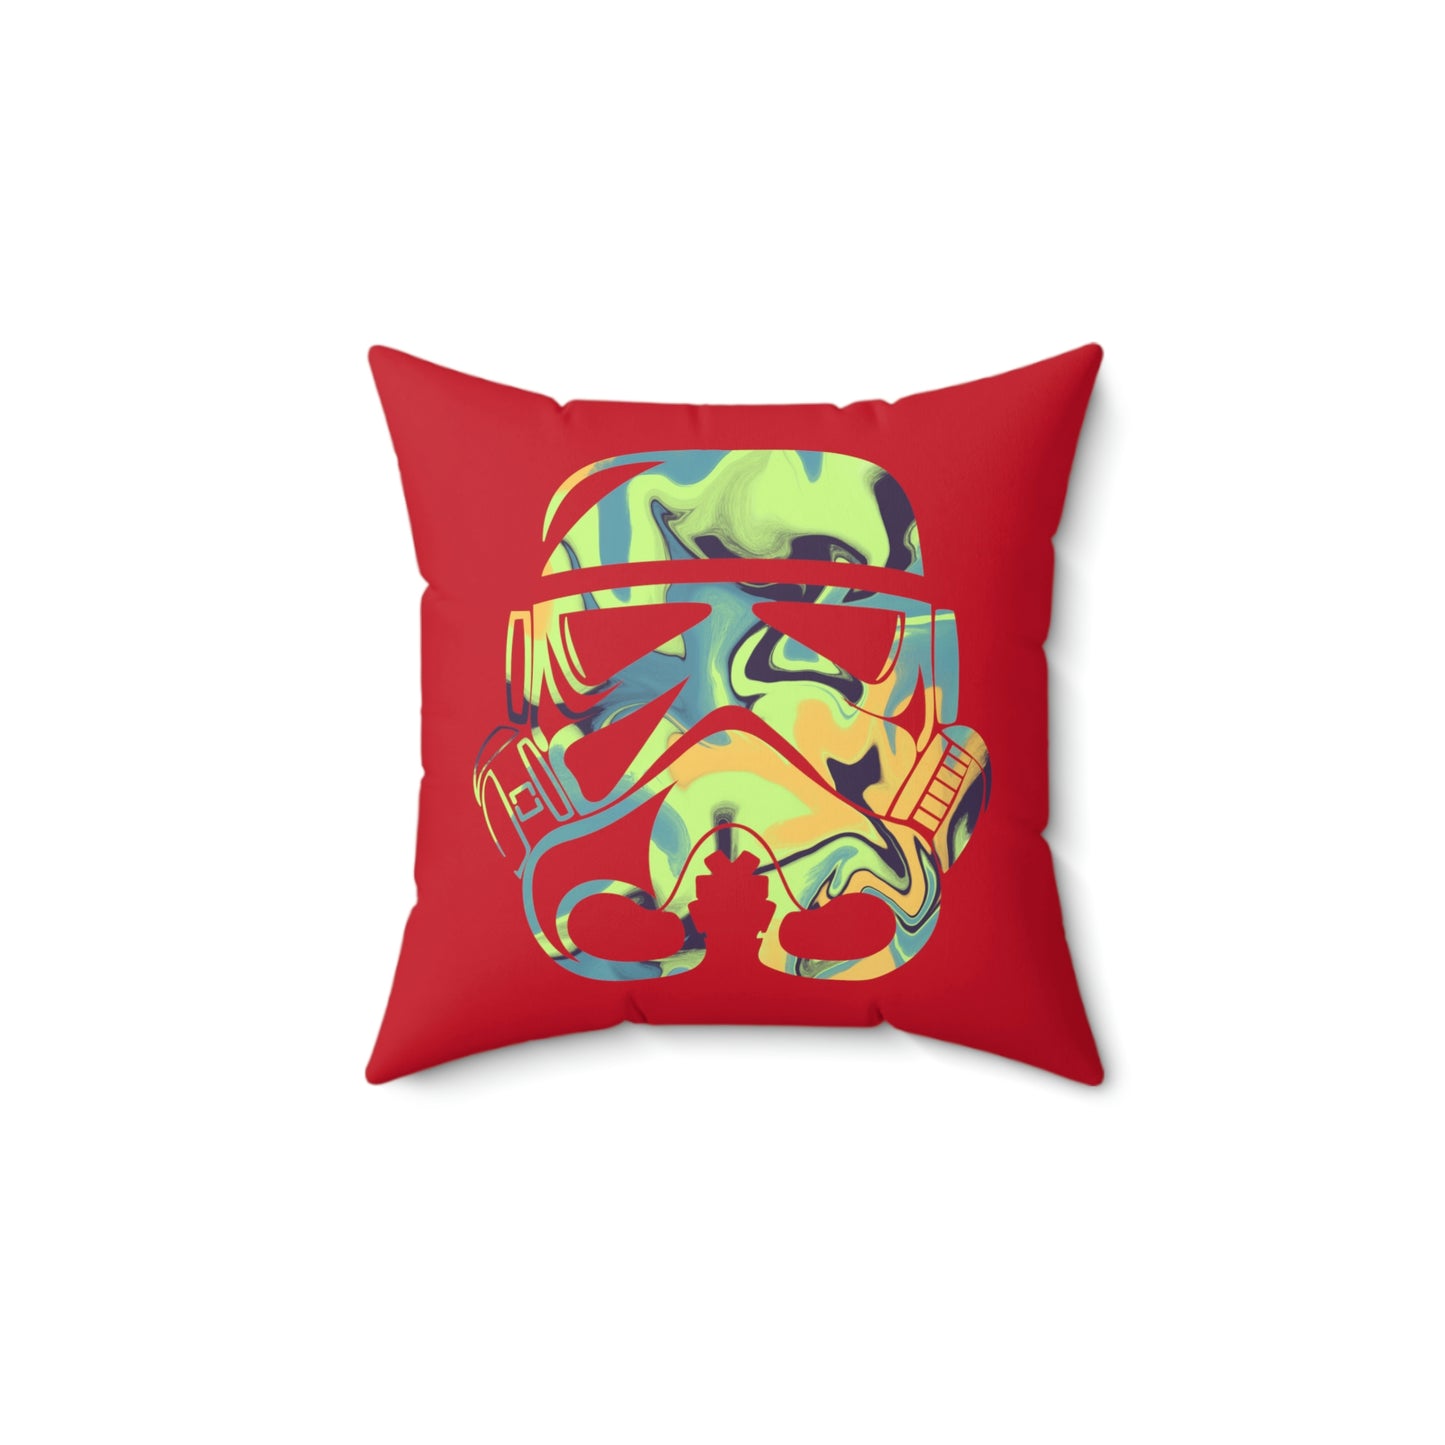 Spun Polyester Square Pillow Case ”Storm Trooper 13 on Dark Red”